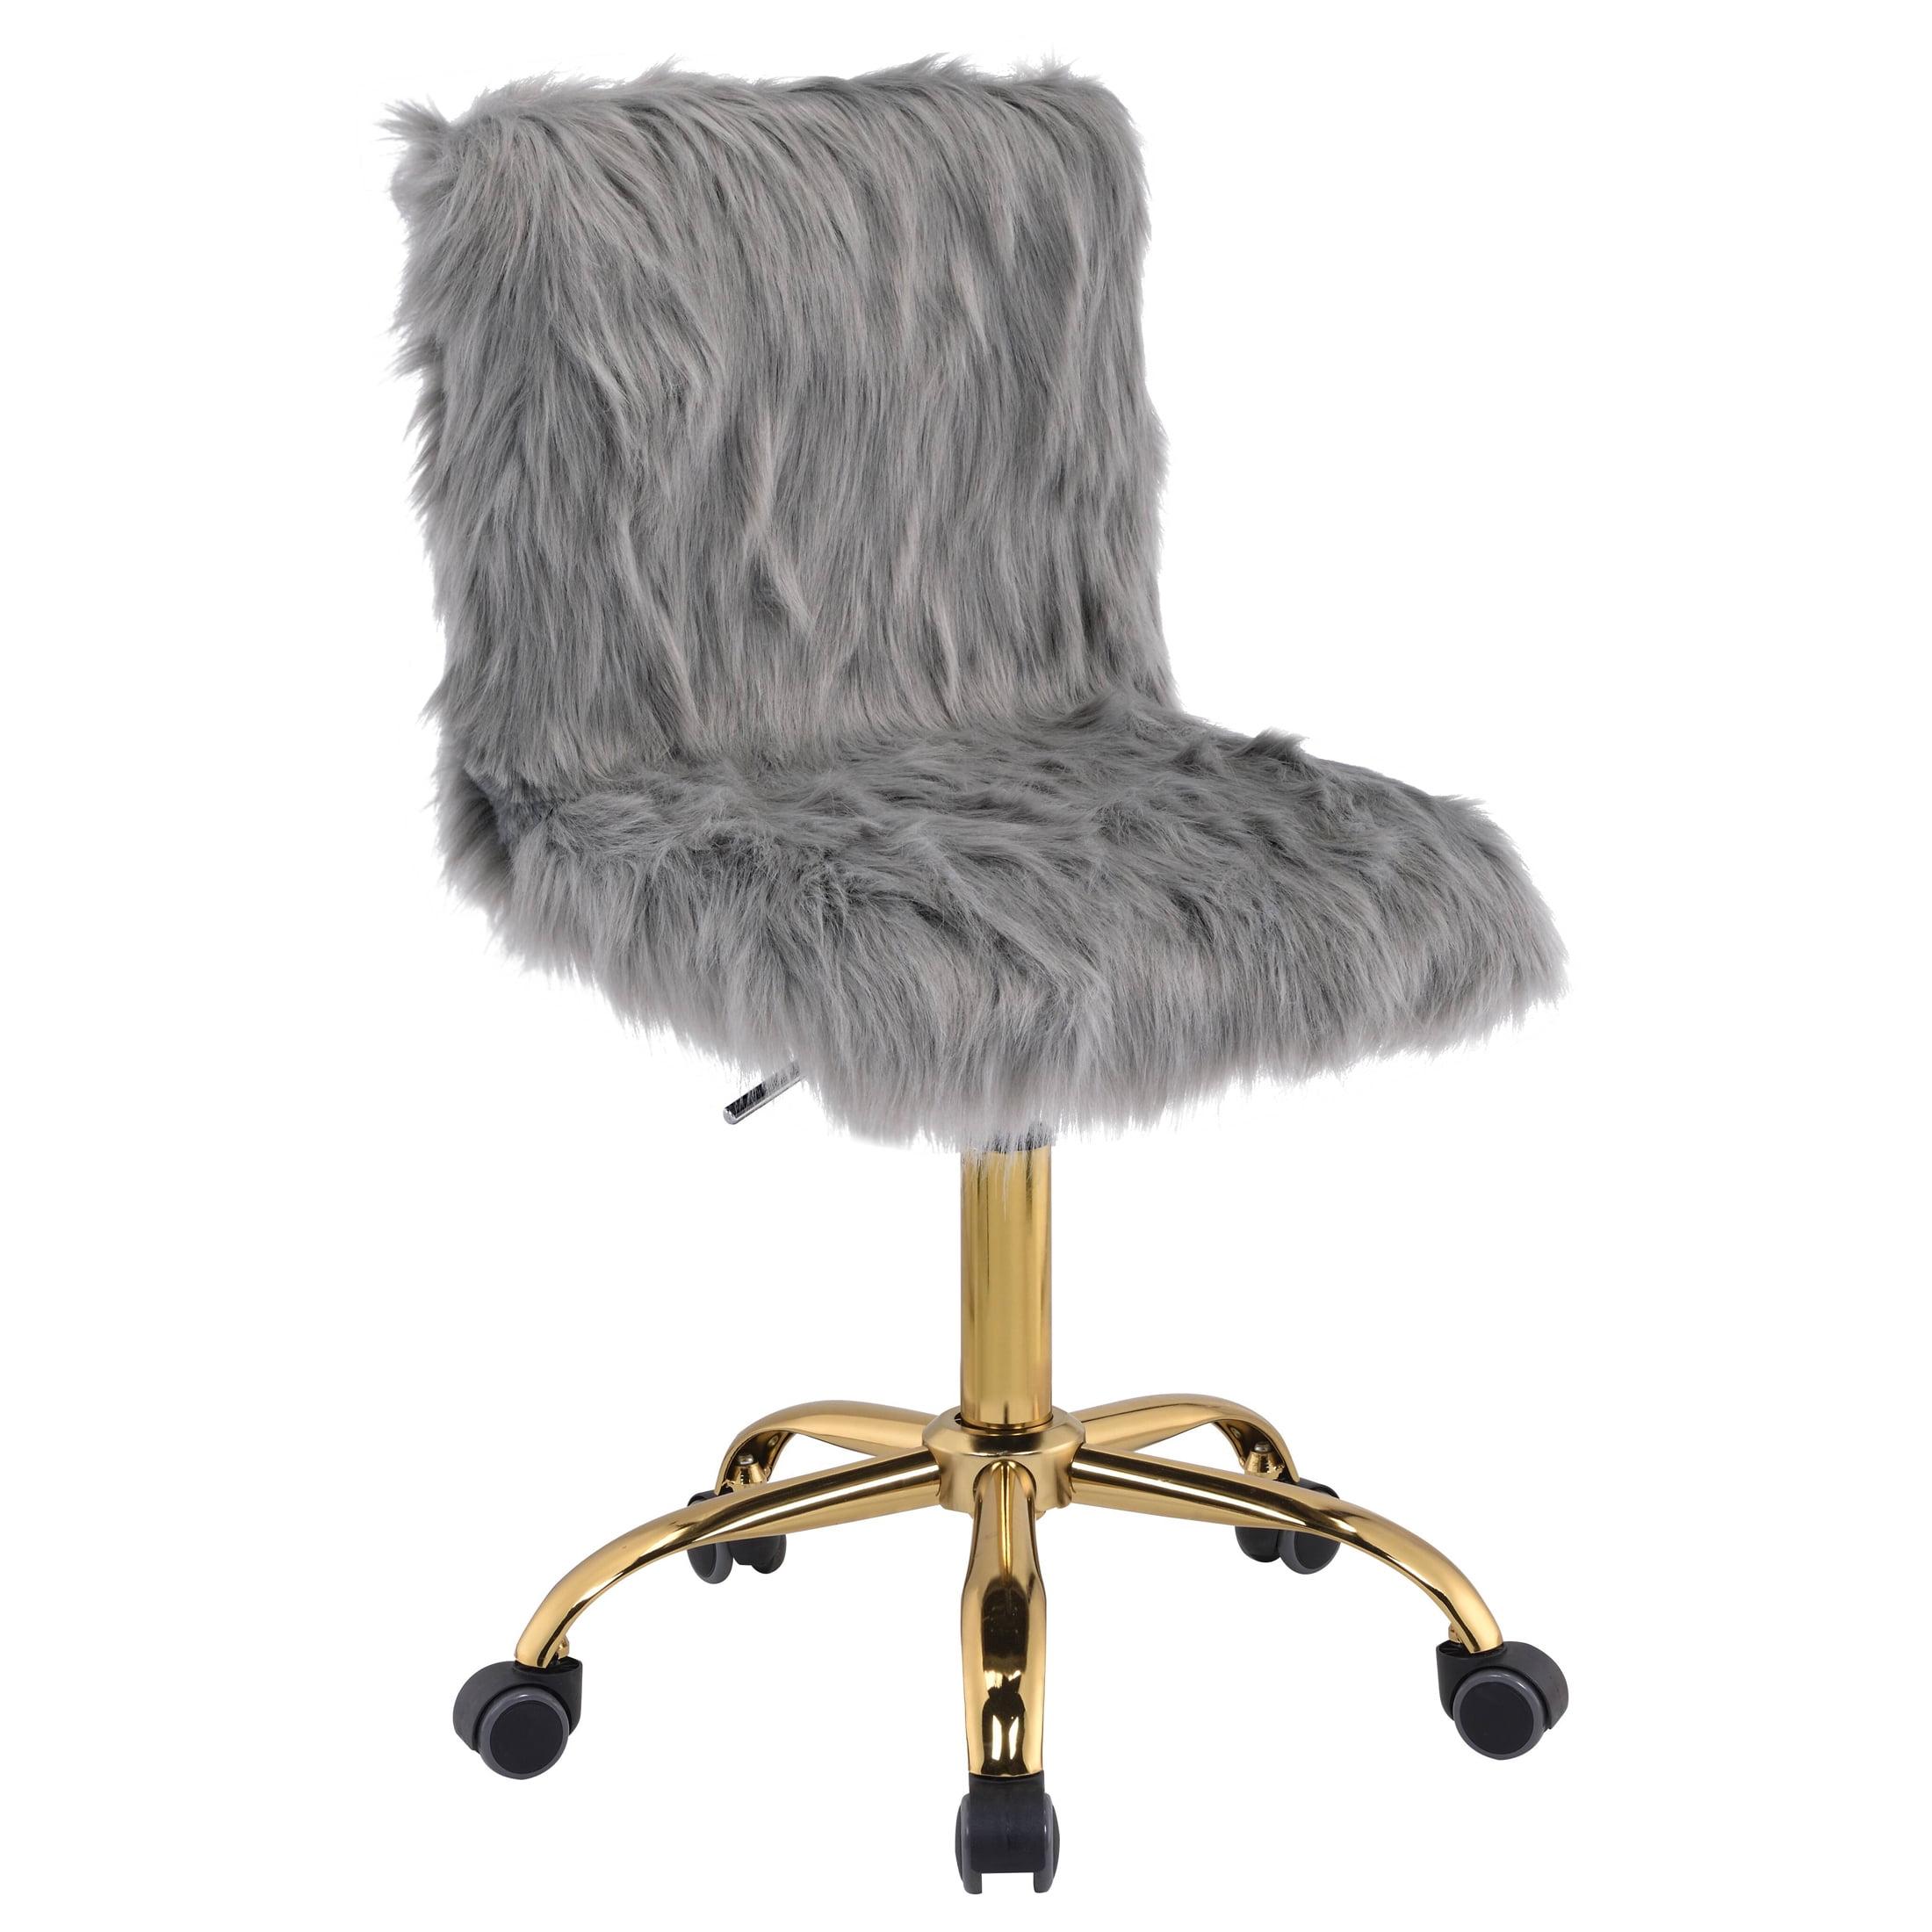 Arundell Gray Faux Fur & Gold Finish Swivel Office Chair